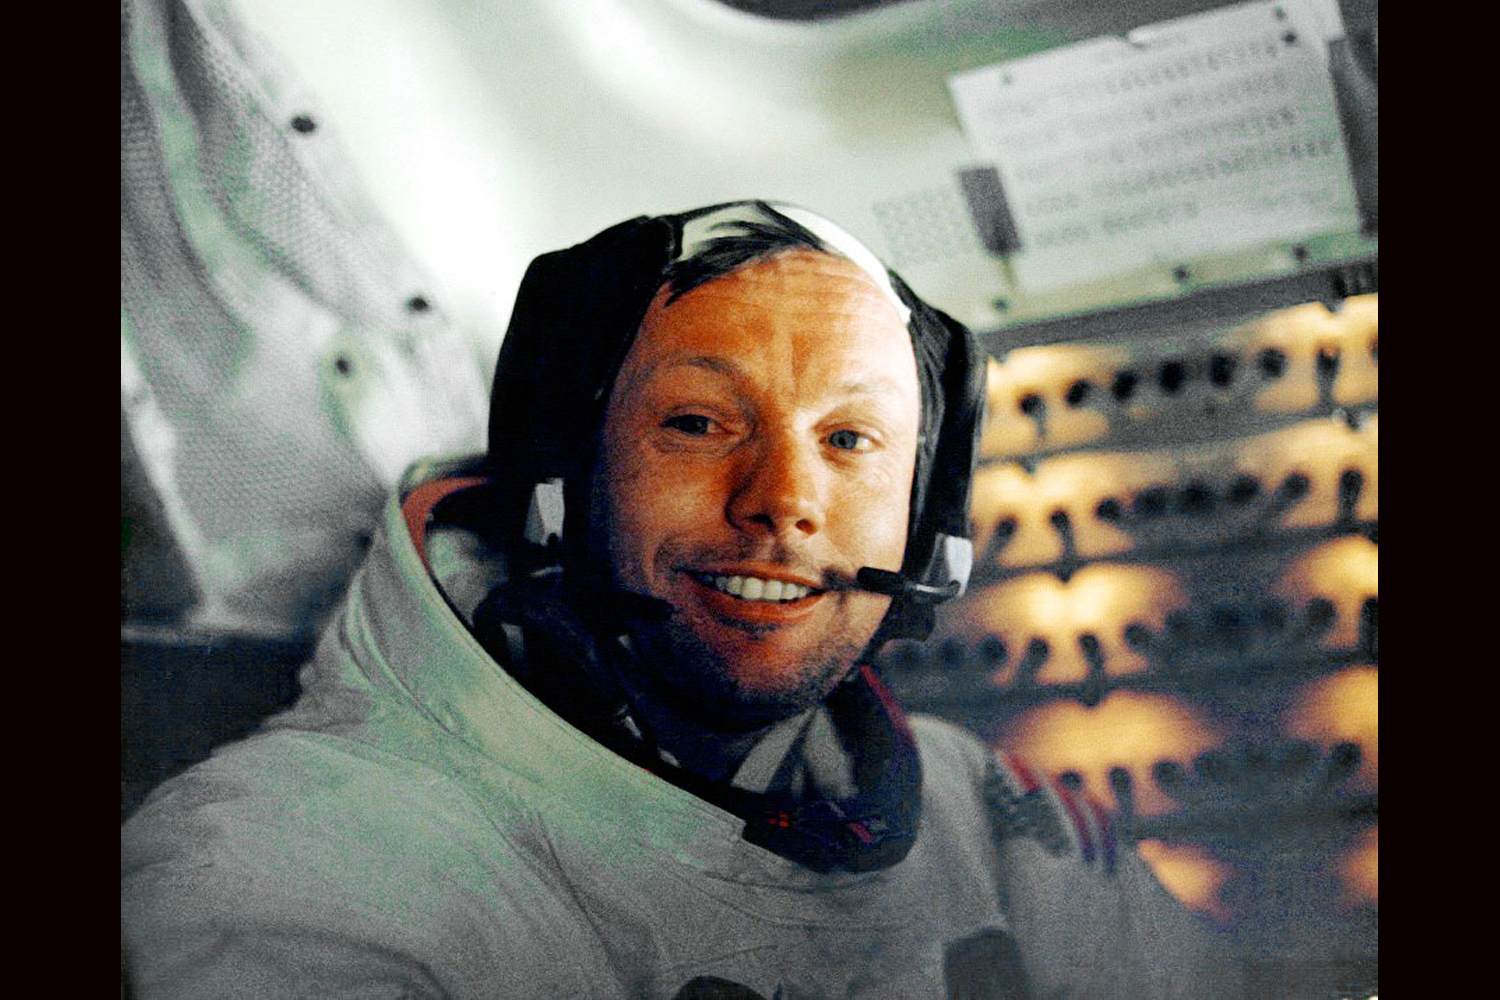 A tired but quietly jubilant Apollo 11 astronaut Neil Armstrong in space capsule after his historic walk on moon, July 1969.